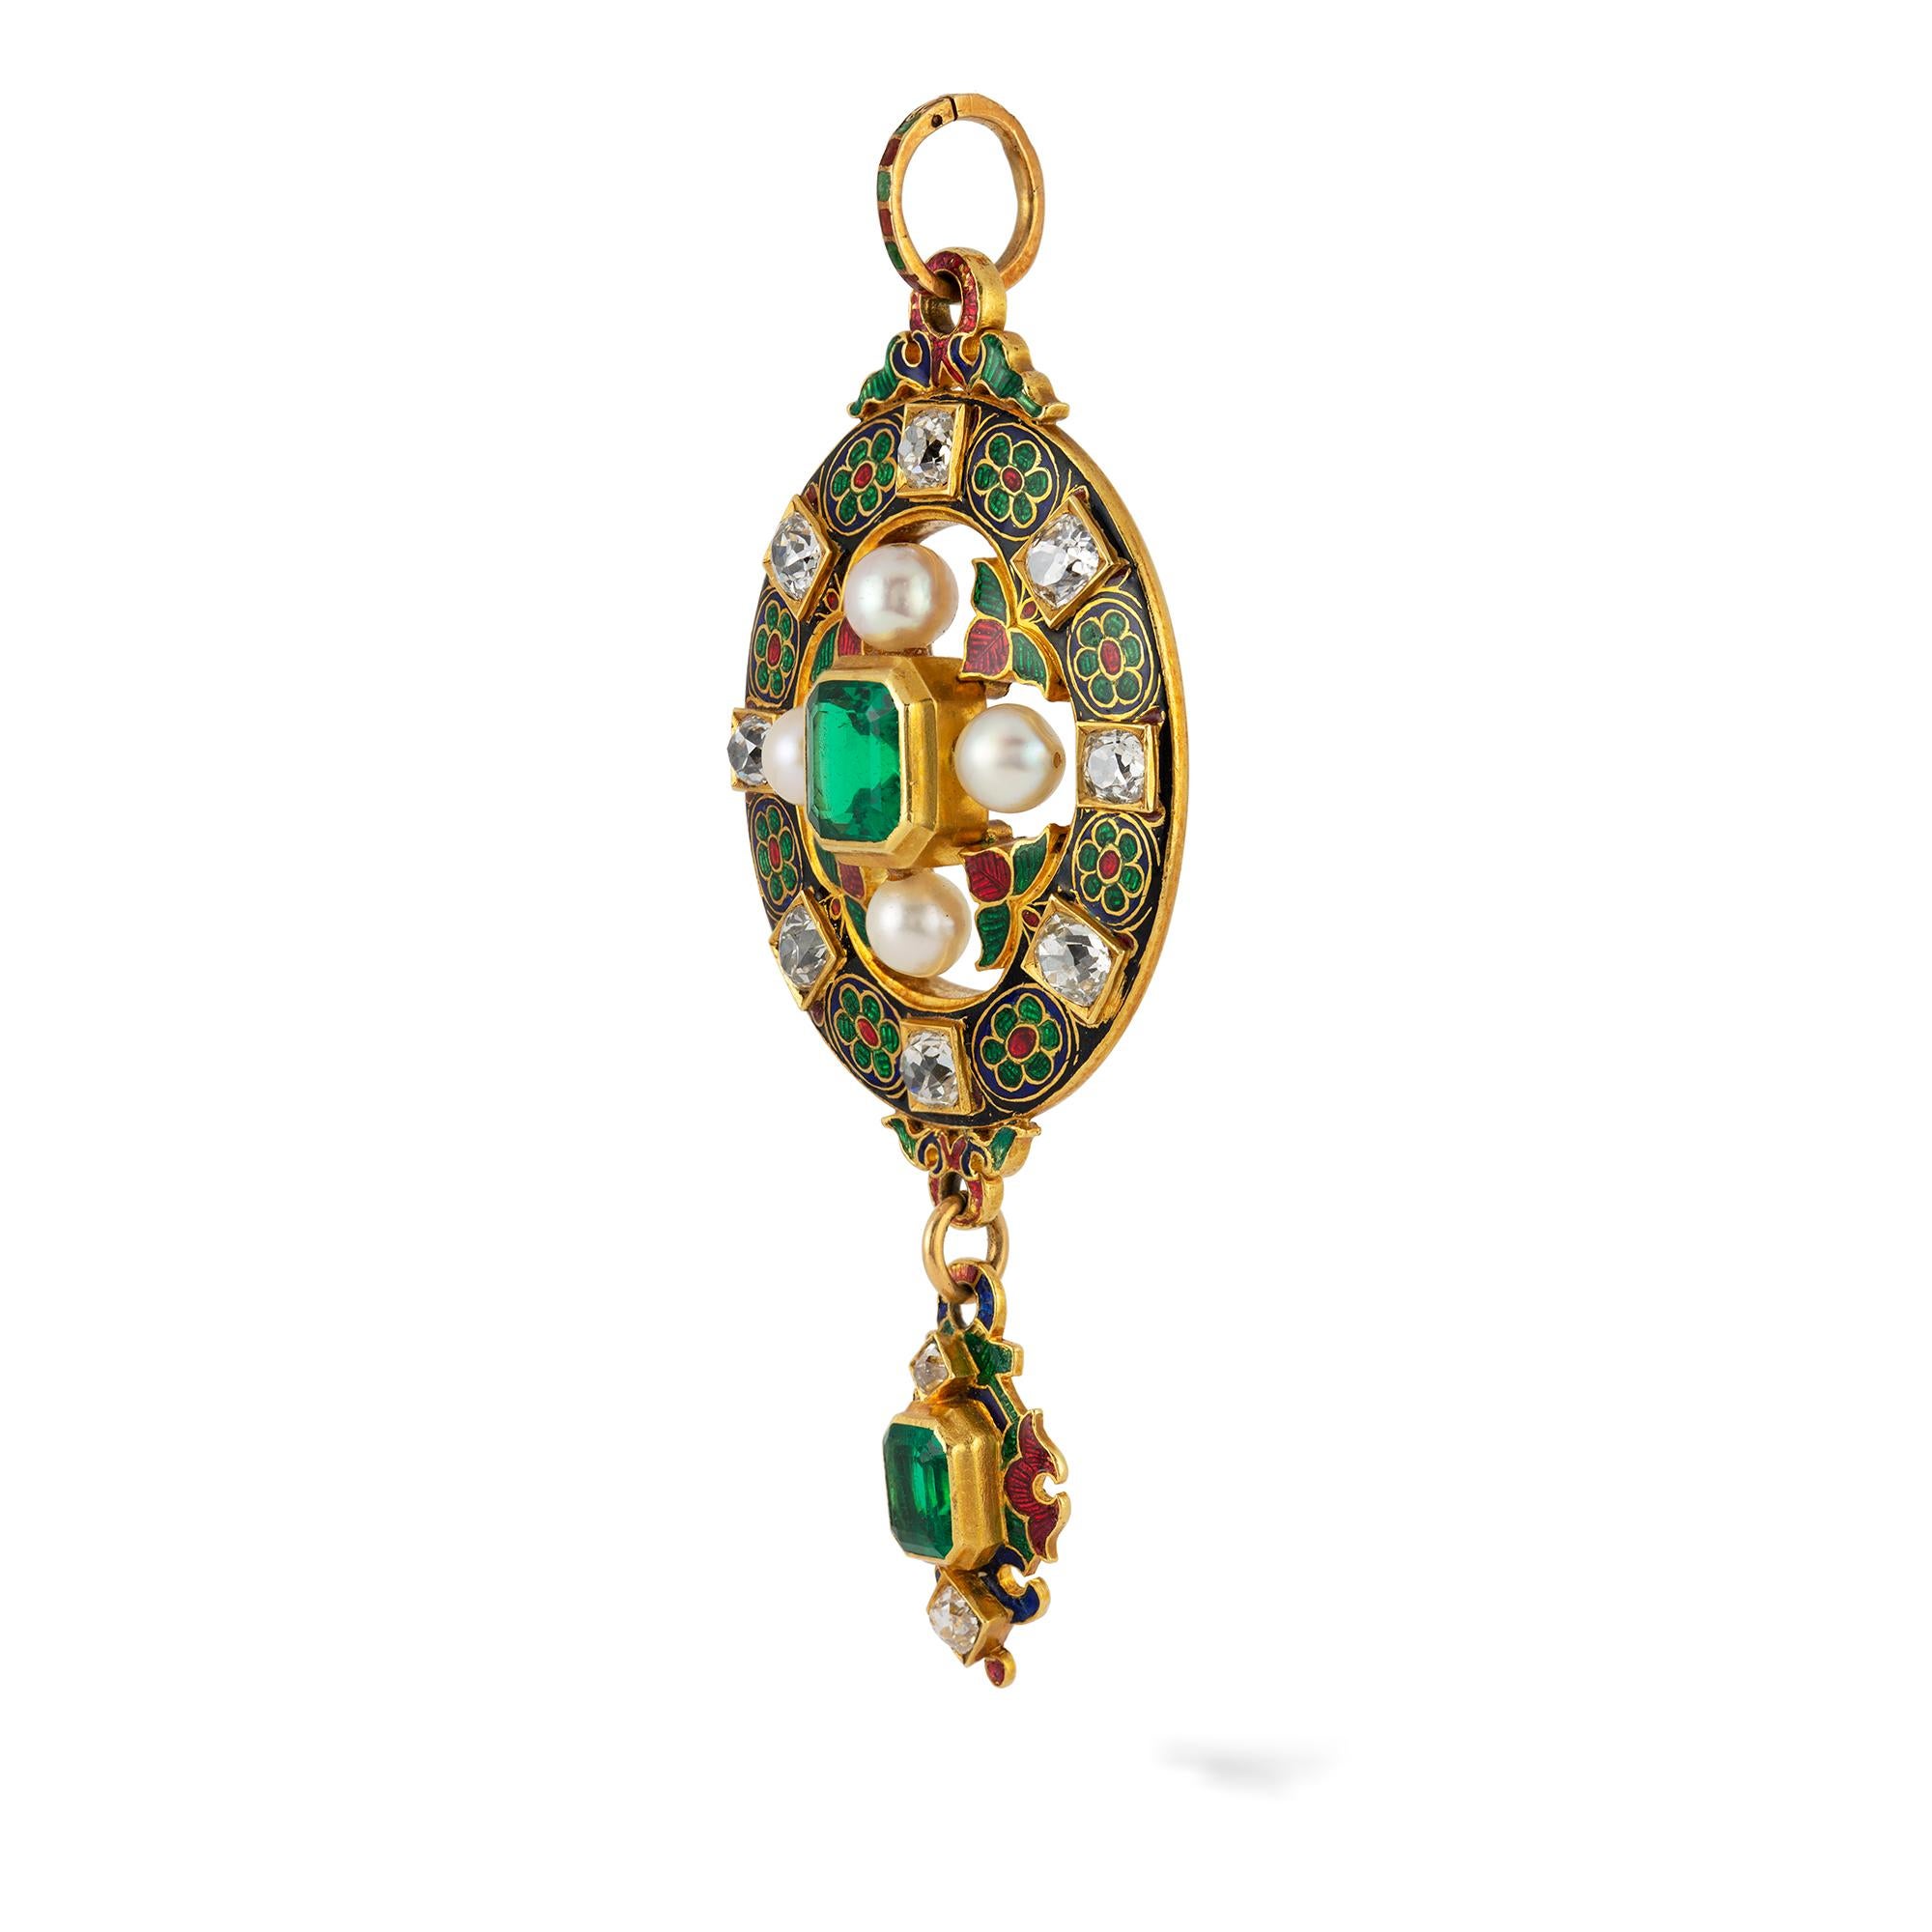 A Victorian Holbeinesque emerald, diamond and pearl pendant, to the centre a square-cut emerald estimated to weigh 1.75 carats, cross-set with four pearls with trefoil enamelled decorations in between, surrounded by a polychrome enamel frame